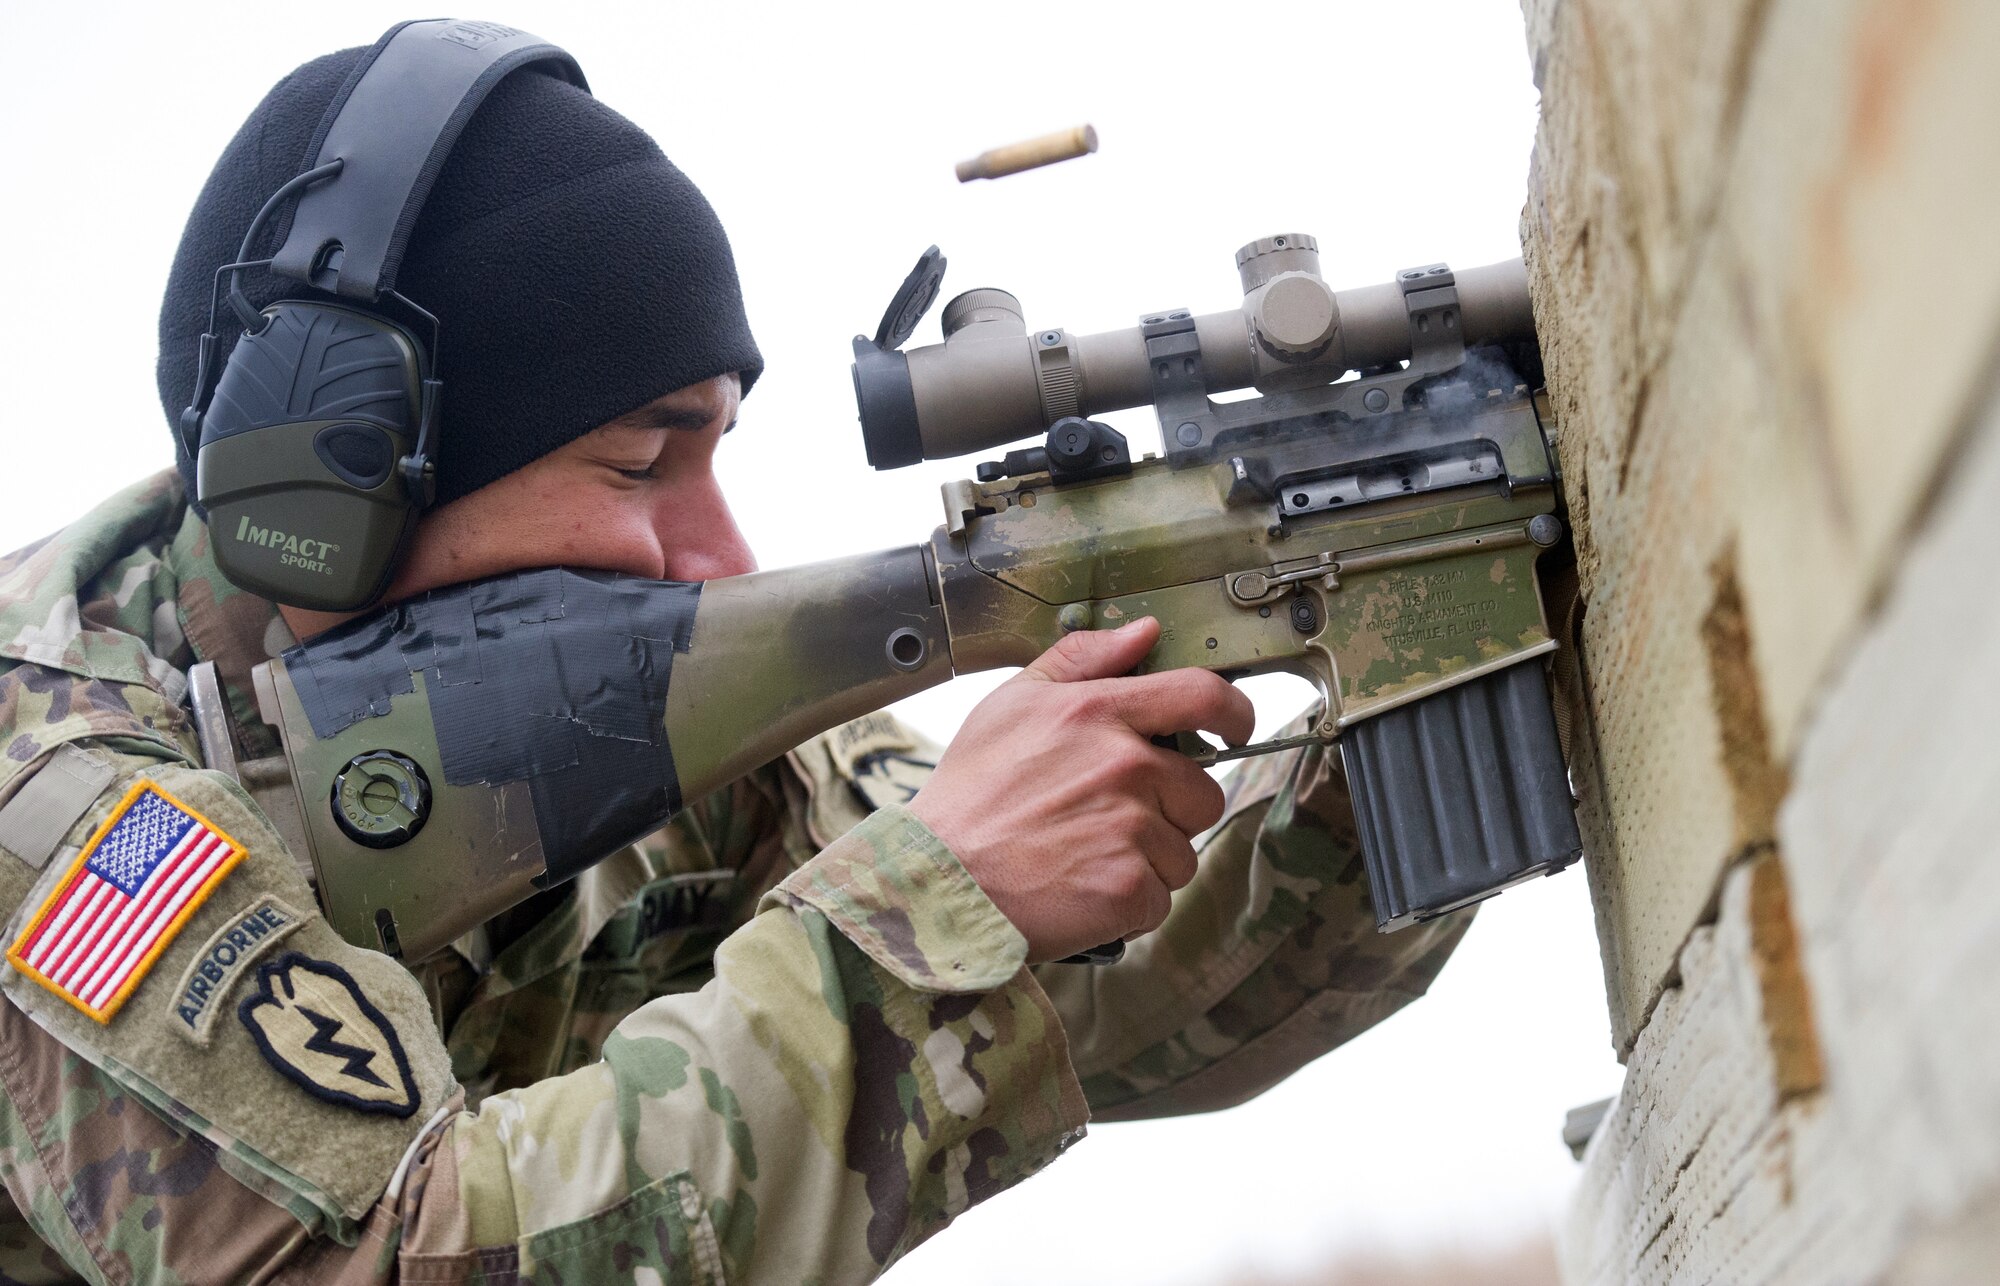 Army Spc. Arturo Dominguez, a native of Okeechobee, Fla., assigned to Charlie Troop, 1st Squadron, 40th Cavalry Regiment (Airborne), 4th Infantry Brigade Combat Team (Airborne), 25th Infantry Division, U.S. Army Alaska, fires a M110 Semi-Automatic Sniper System at a long-distance target on Statler range at Joint Base Elmendorf-Richardson, Alaska, April 6, 2018, during marksmanship training.  A sniper's main responsibility is to deliver discriminatory, highly accurate rifle fire against enemy targets that cannot be engaged successfully by the regular rifleman due to range, size, location, fleeting nature, or visibility.